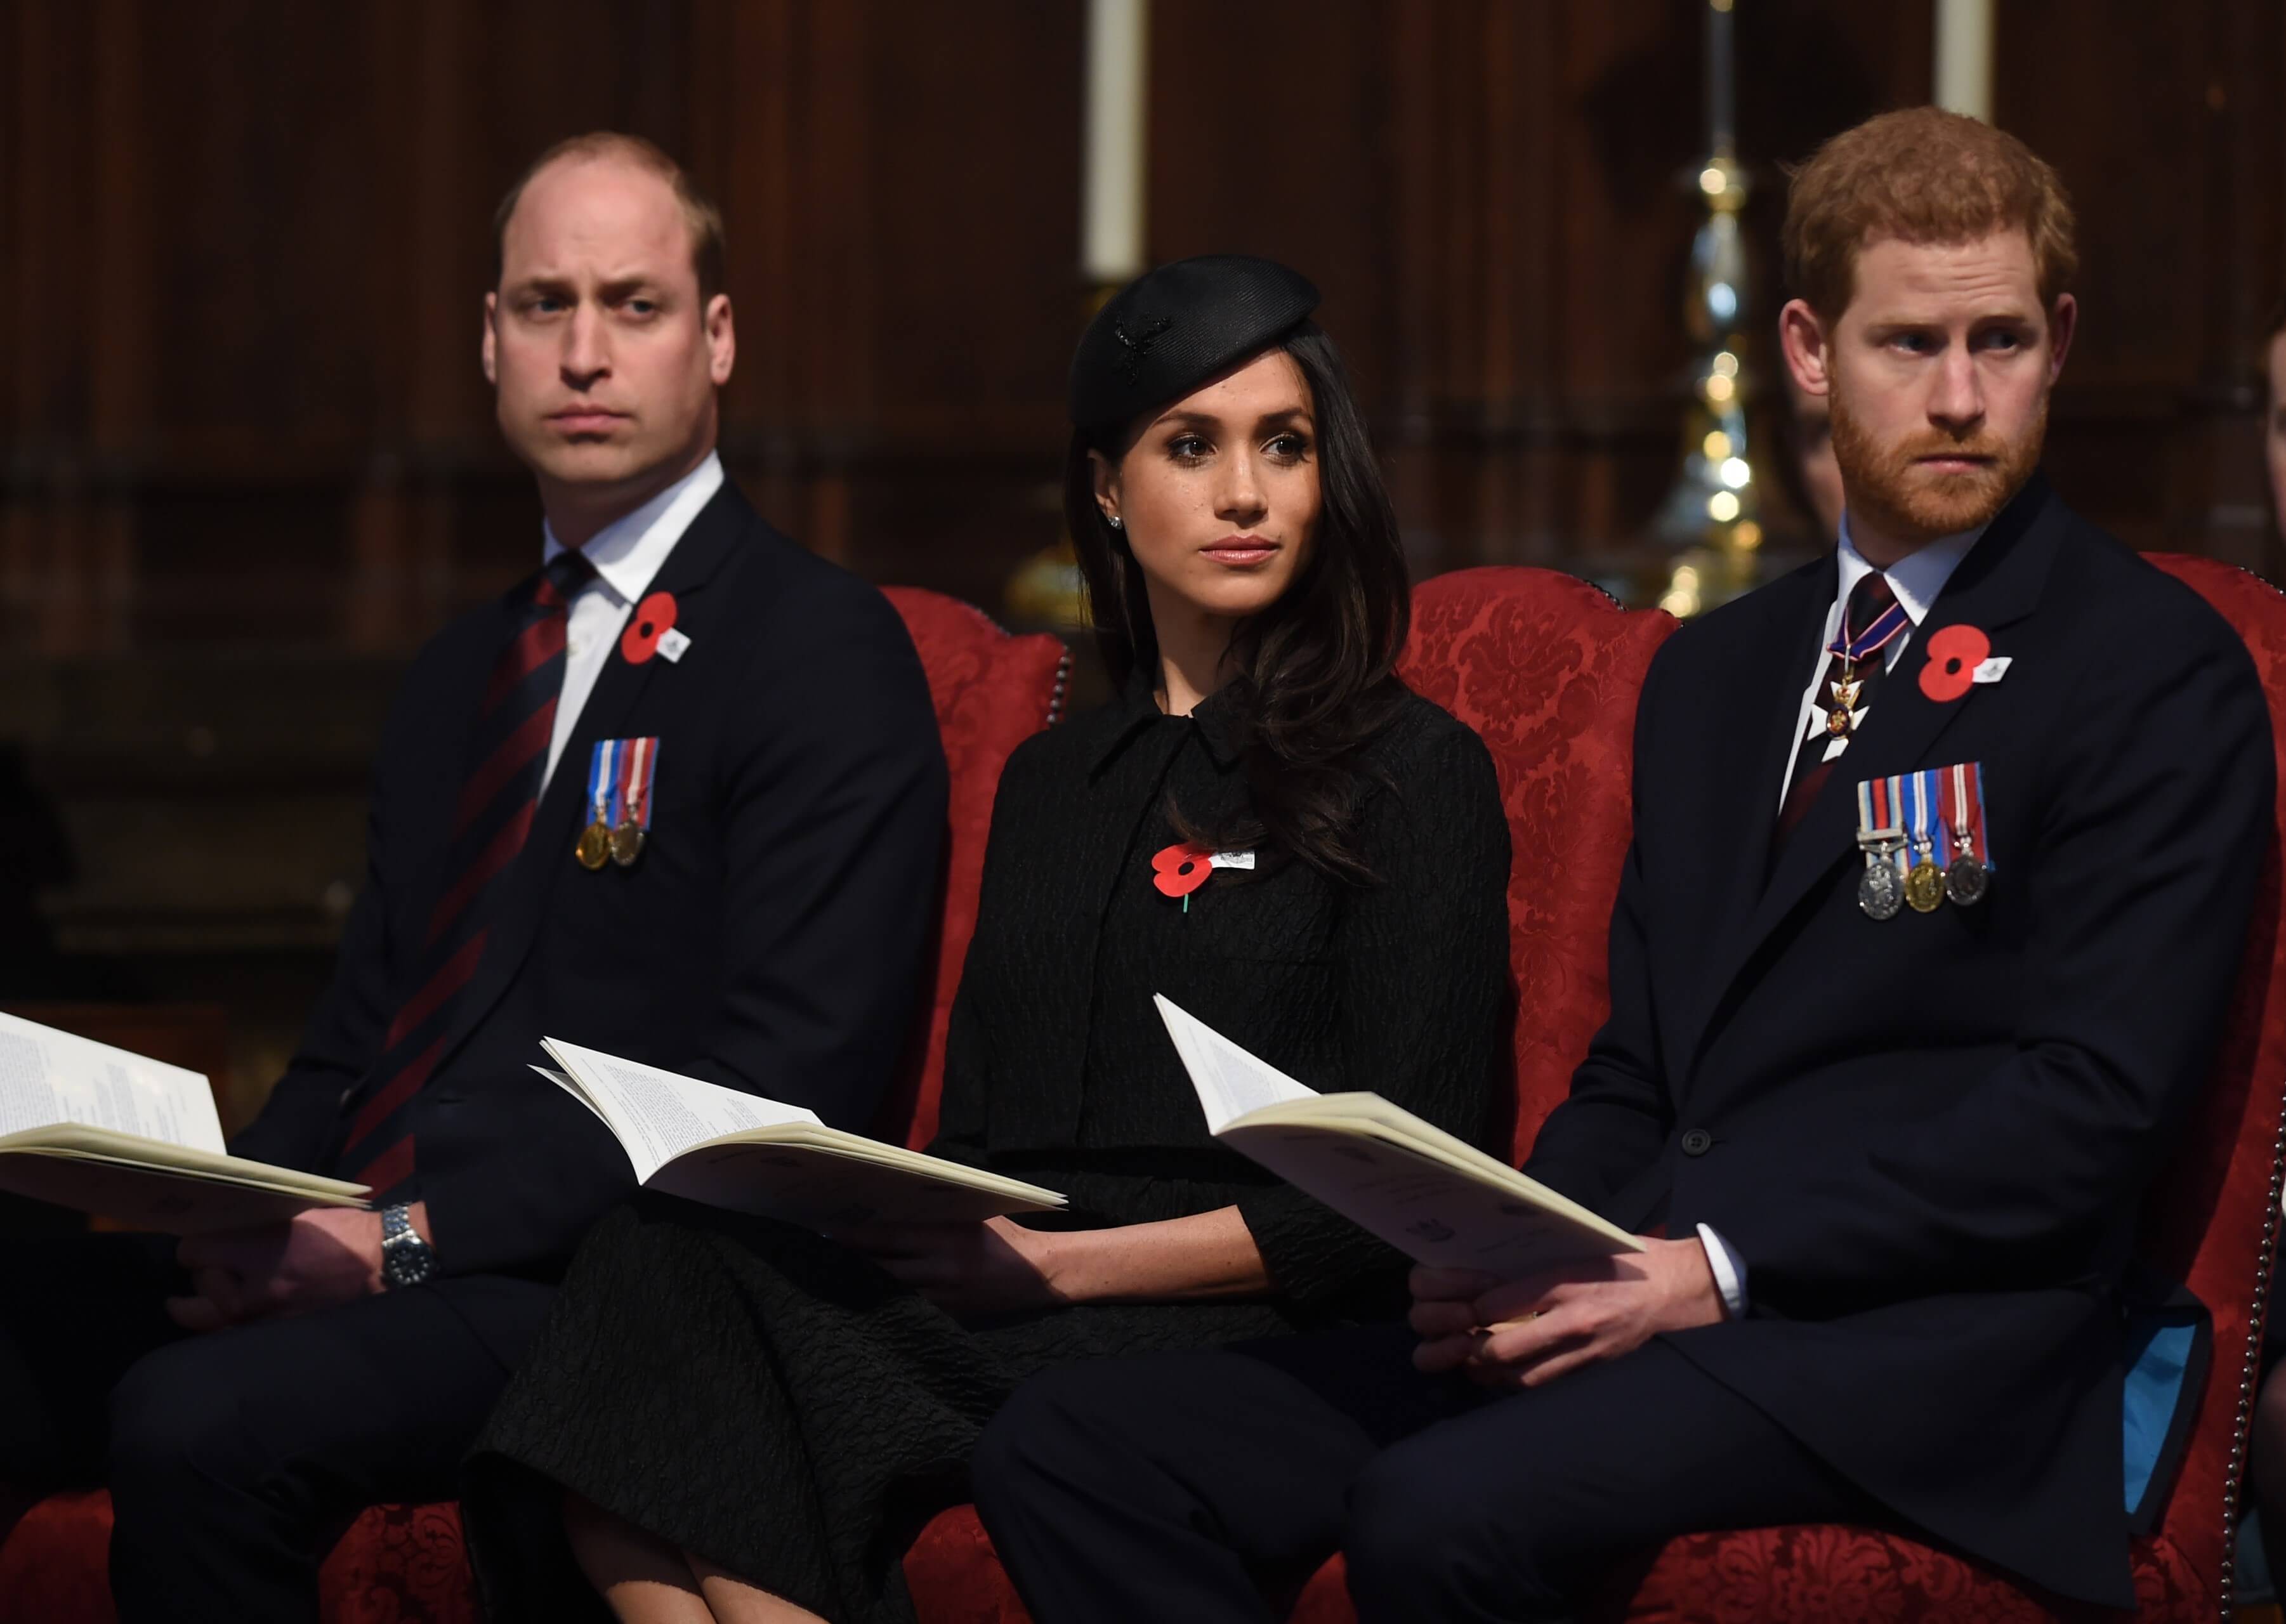 Prince William, Prince Harry, and Meghan Markle, who a body language expert says took disagreements between the brothers seriously, attend 2018 Anzac Day service